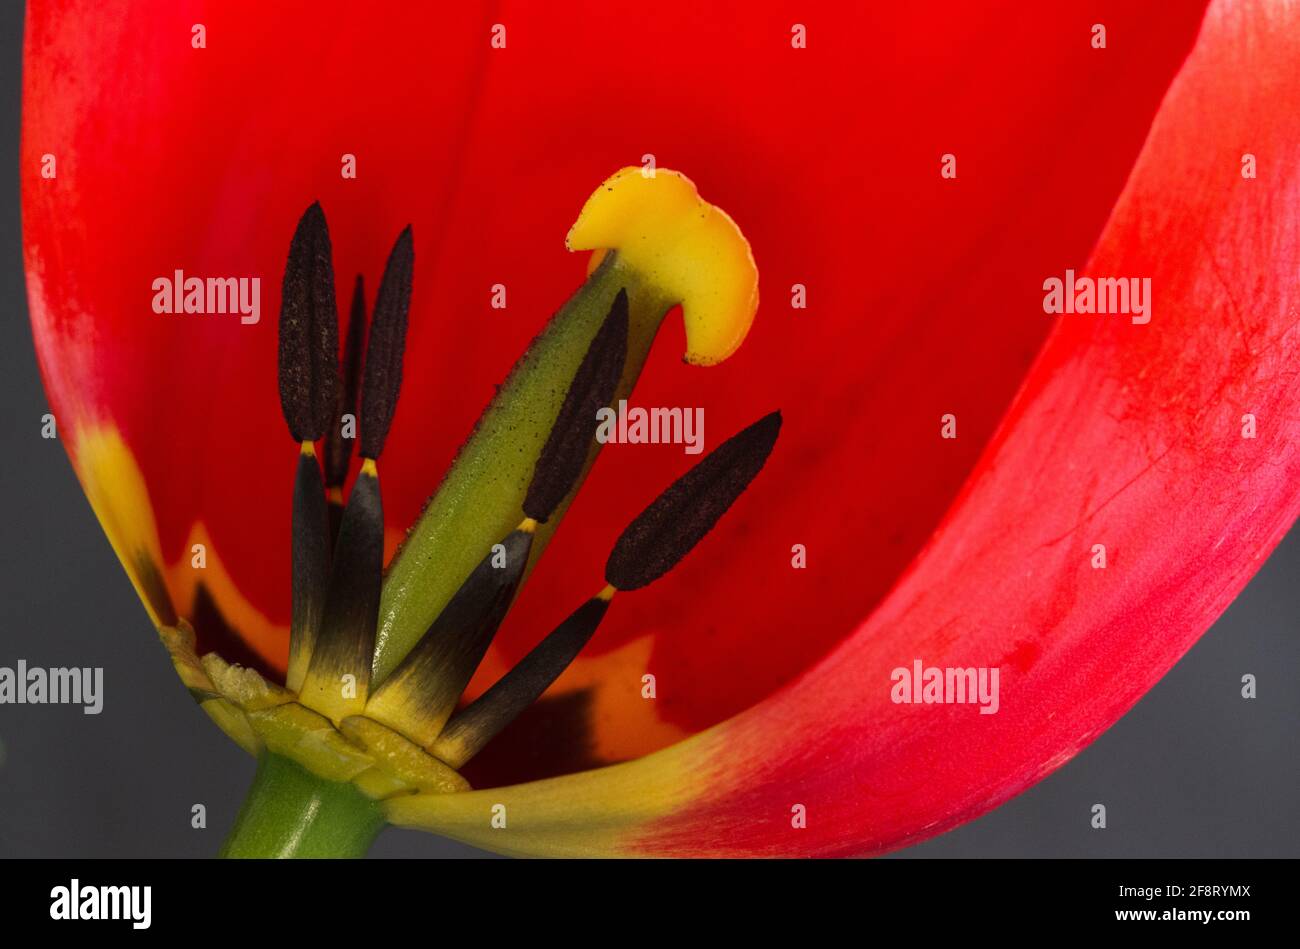 The Pistil and stamens deep inside the tulip flower are the reproductive parts. The stamen produce the pollen but many hybrid cultivars are sterile Stock Photo